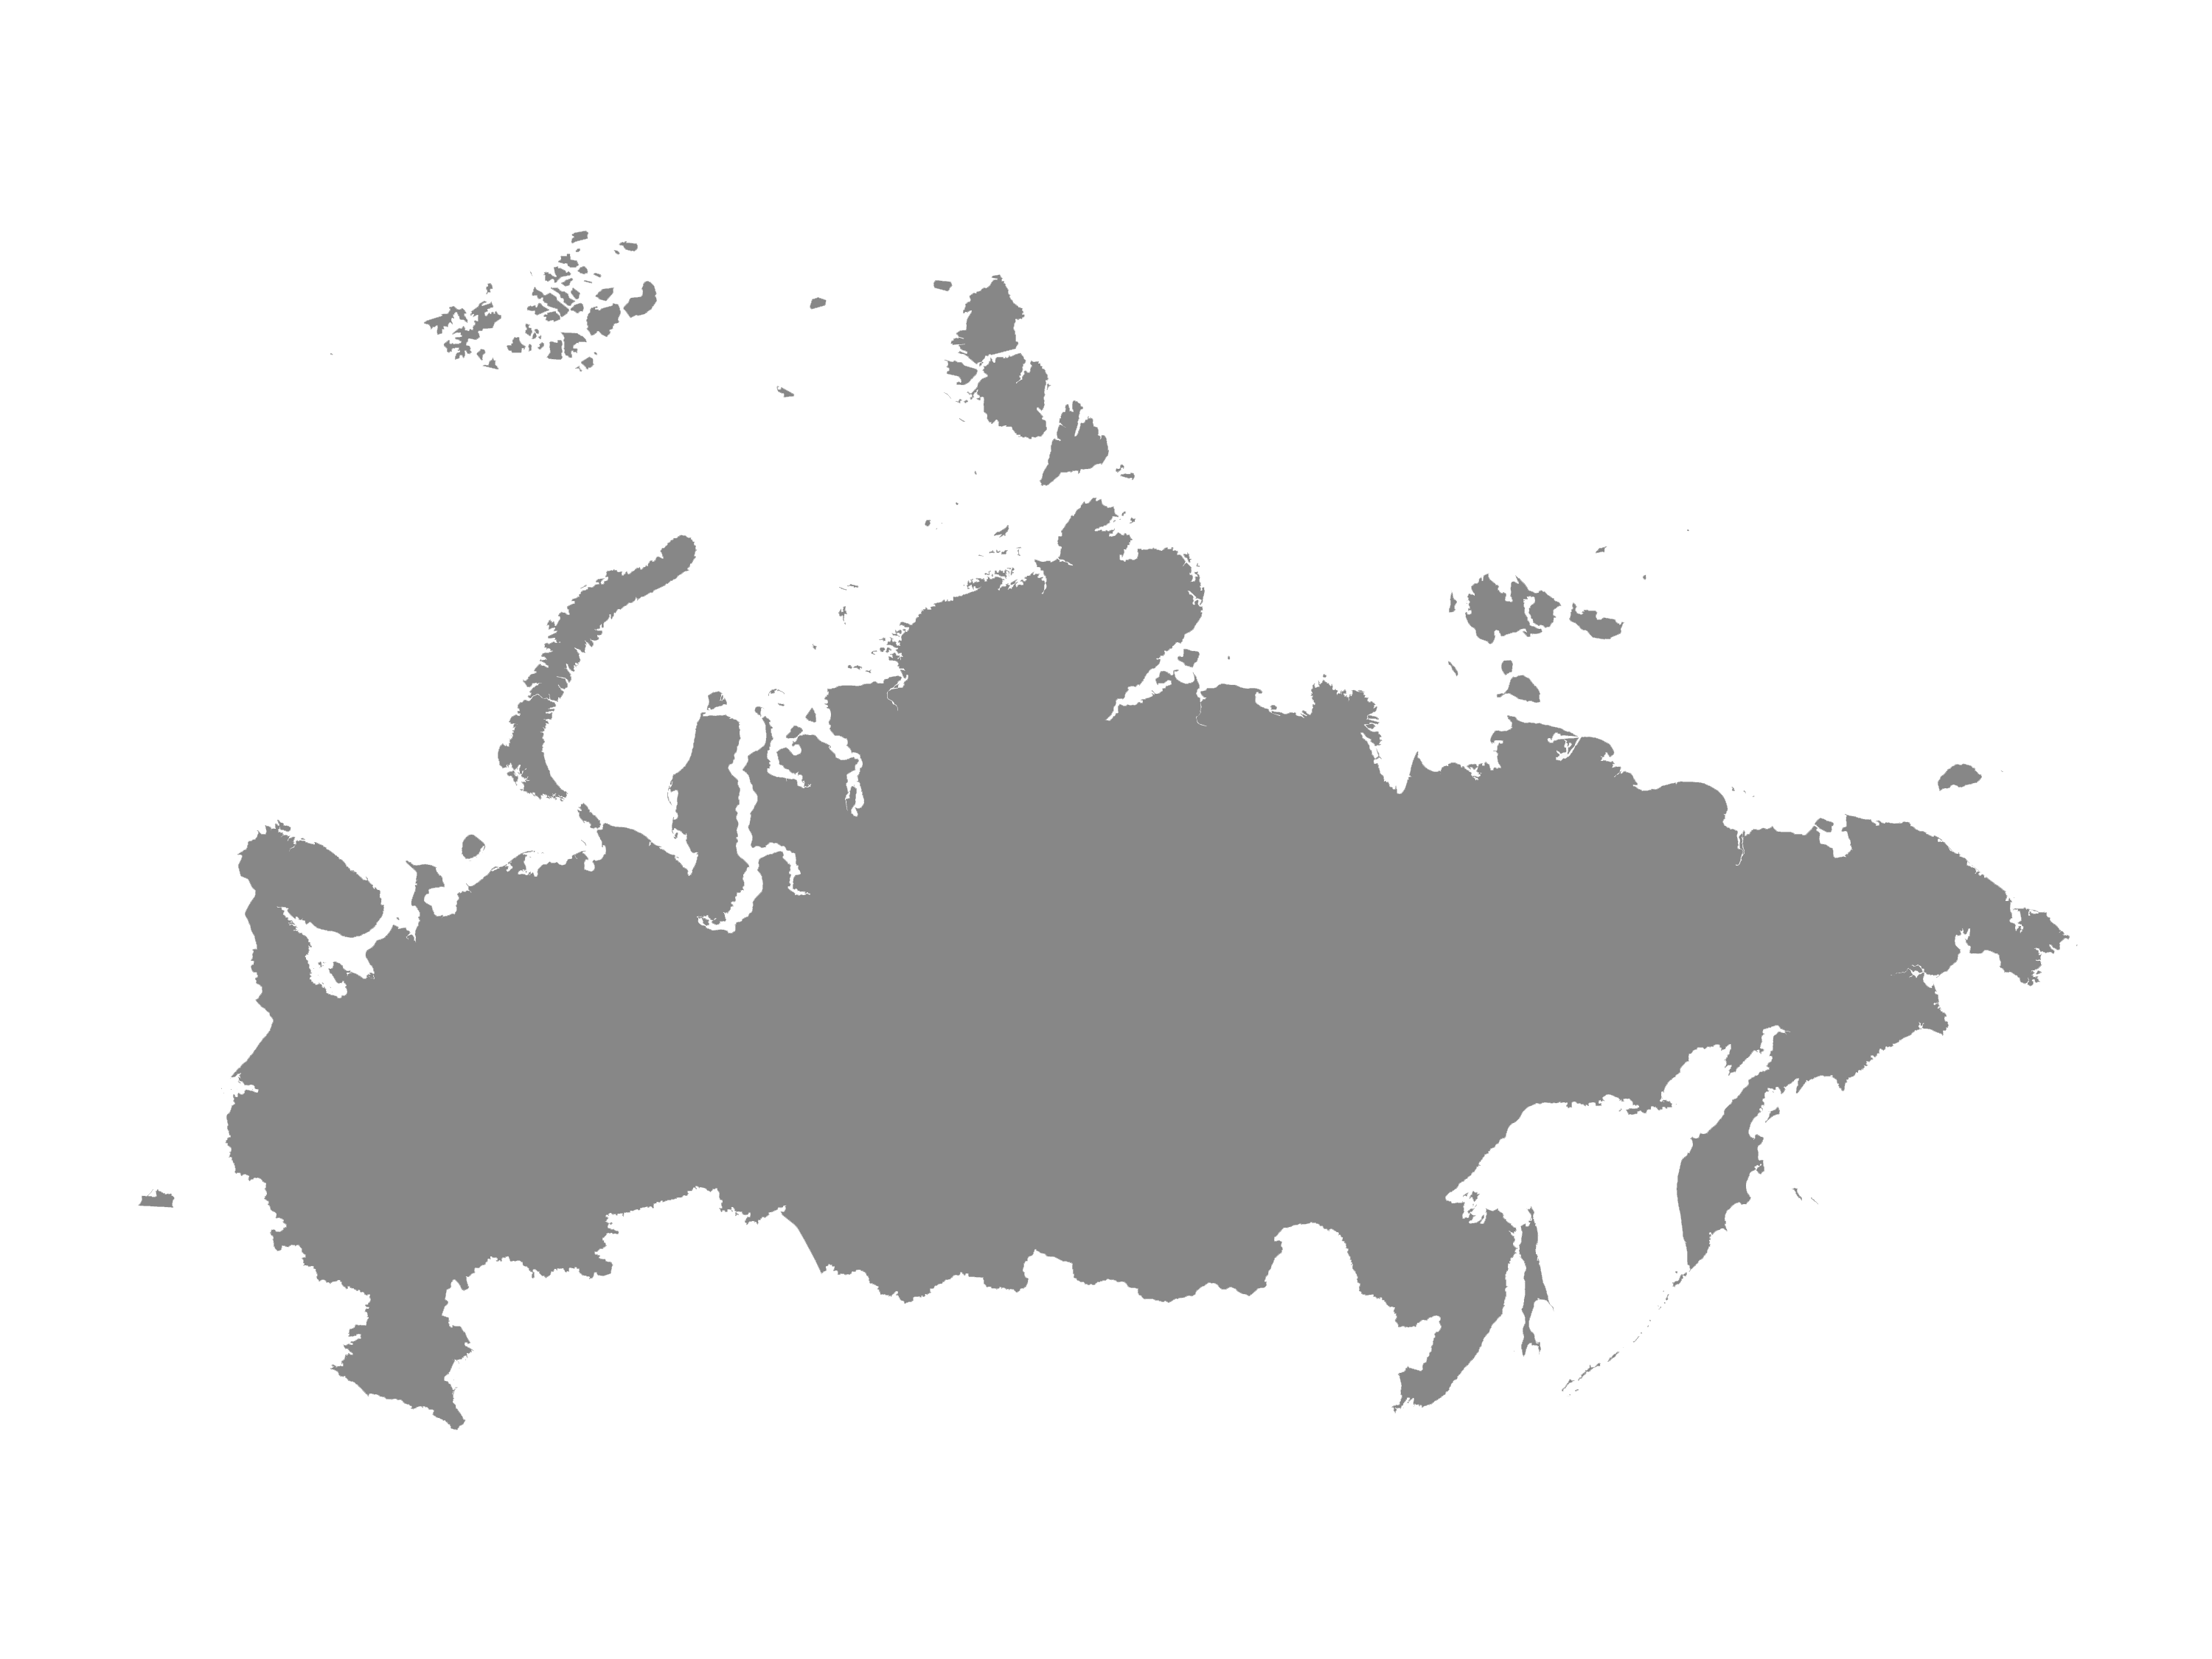 Russia - Single Color by FreeVectorMaps.com